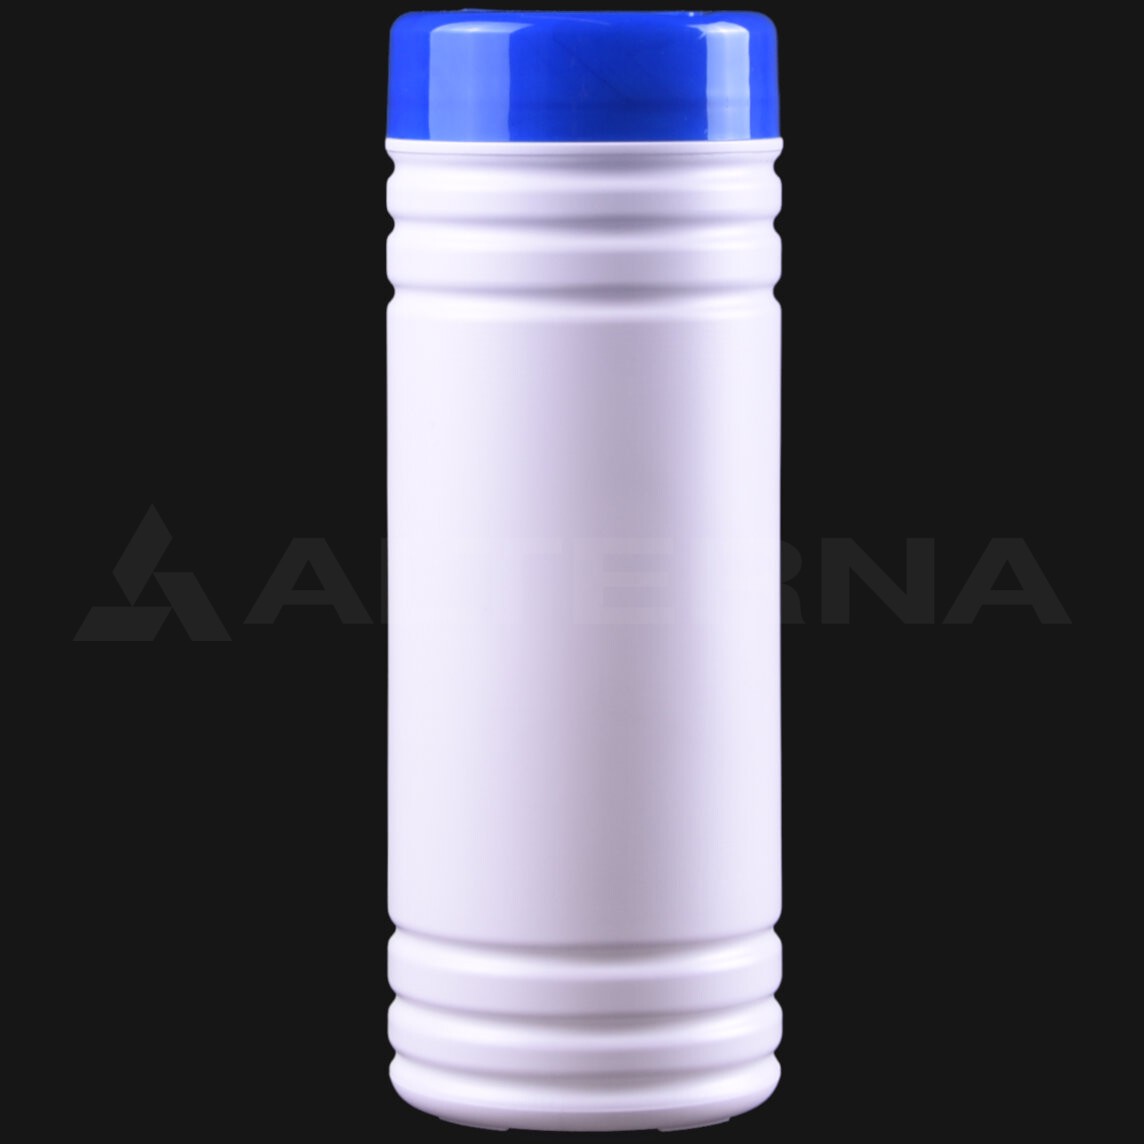 1000 ml HDPE Jar for Wet Wipes (80 pcs)